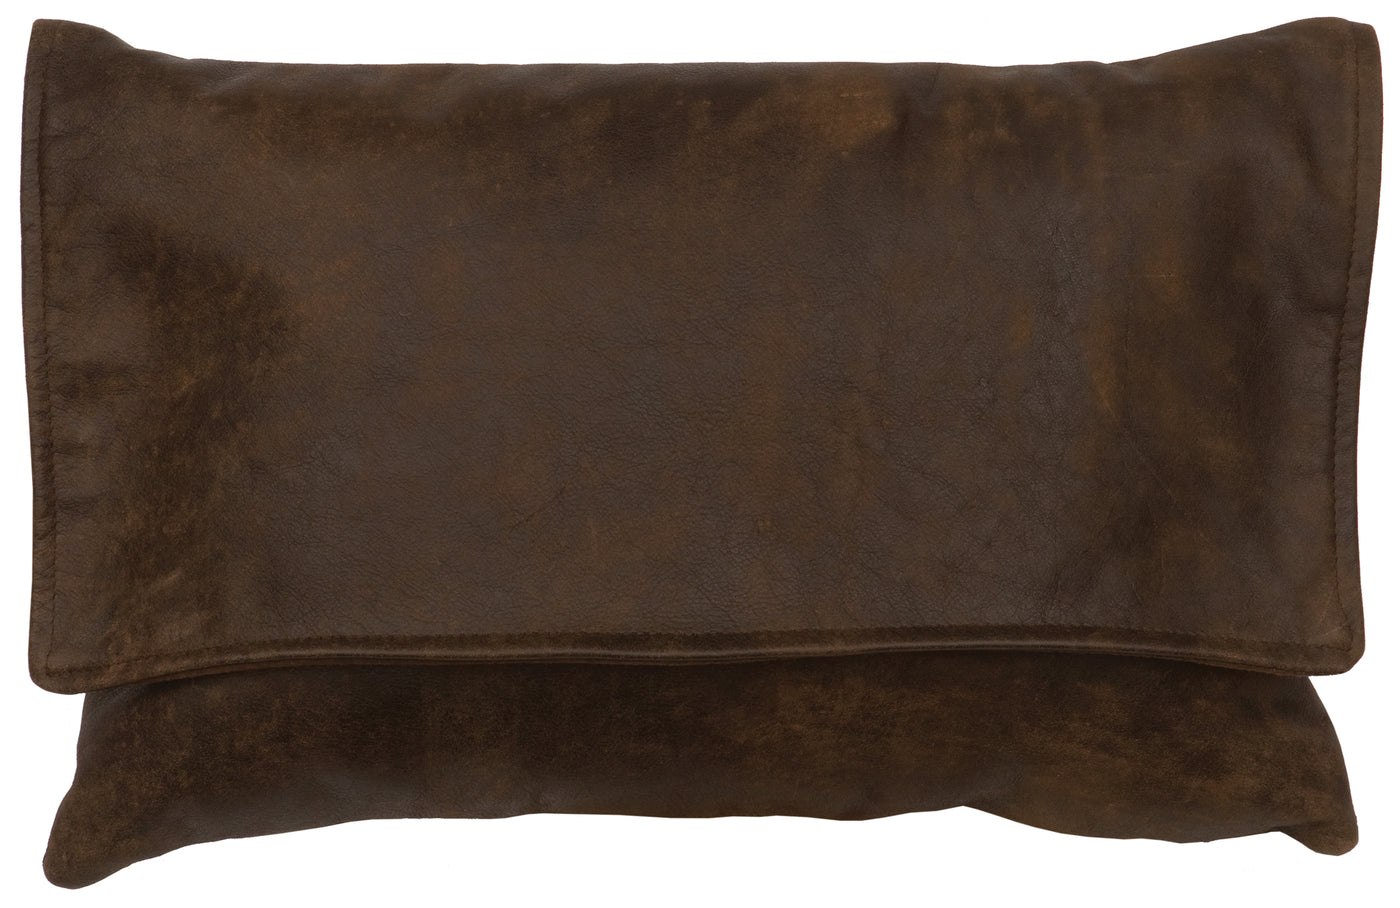 Canvello Timber Leather Pillow - Fabric Back - 12"x18"